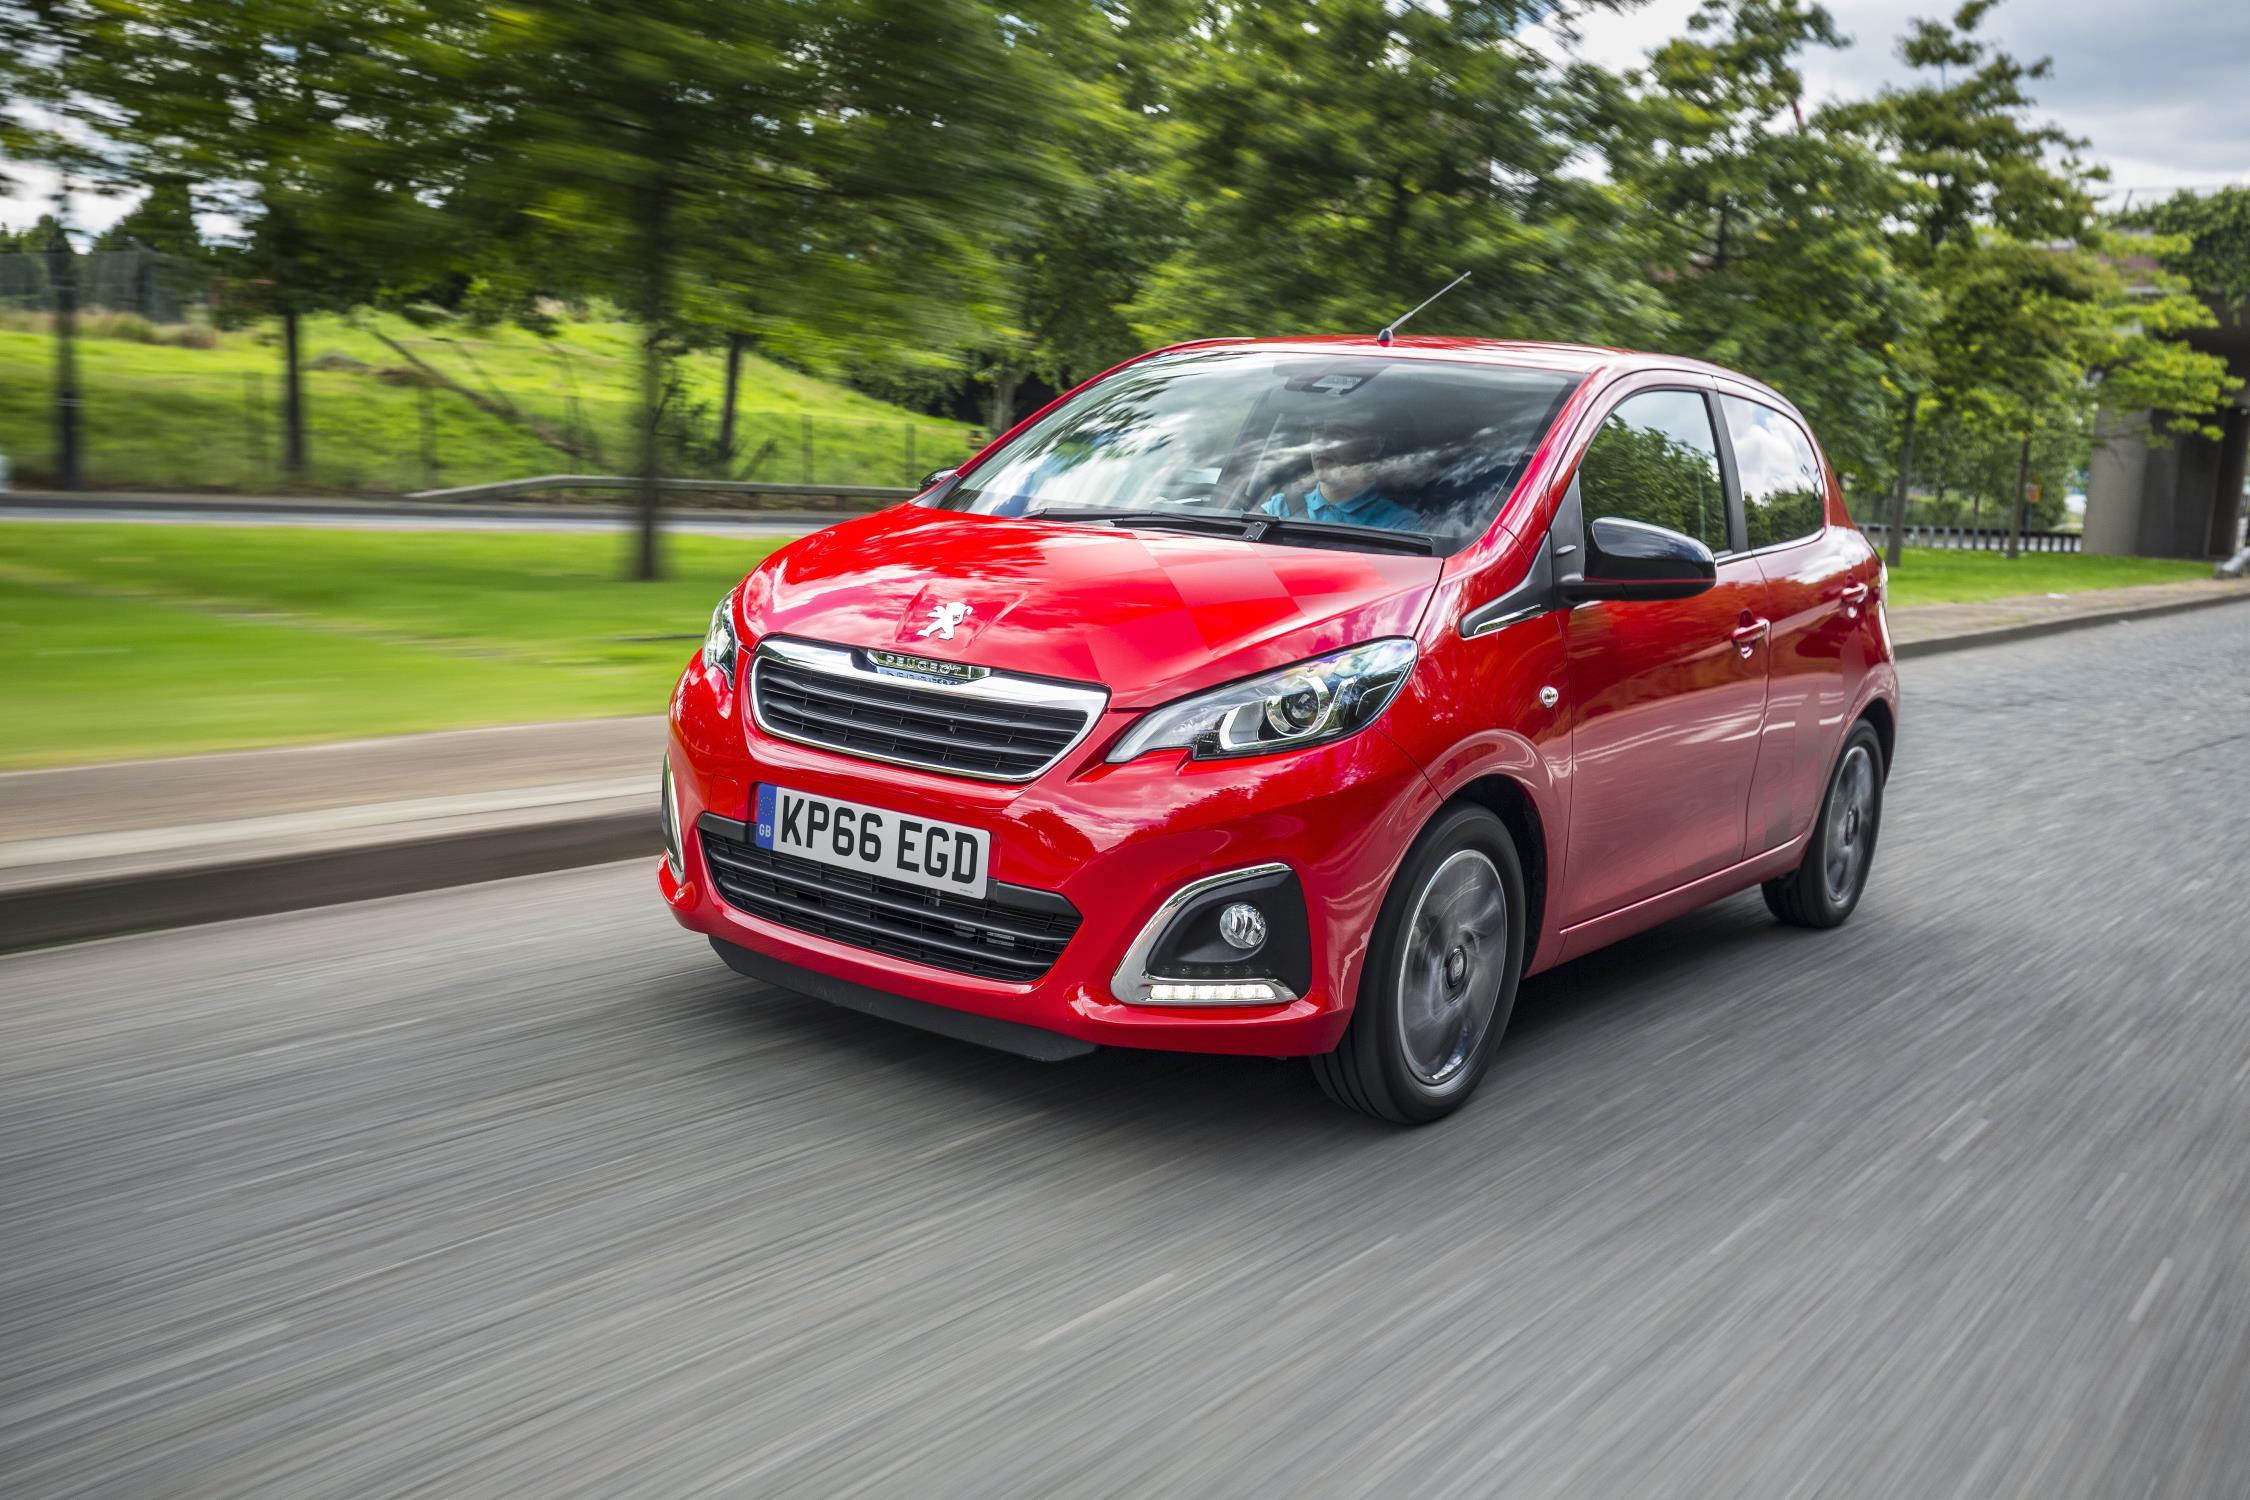 A perky little Peugeot 108 came in at £152.90 with a £2,500 deposit